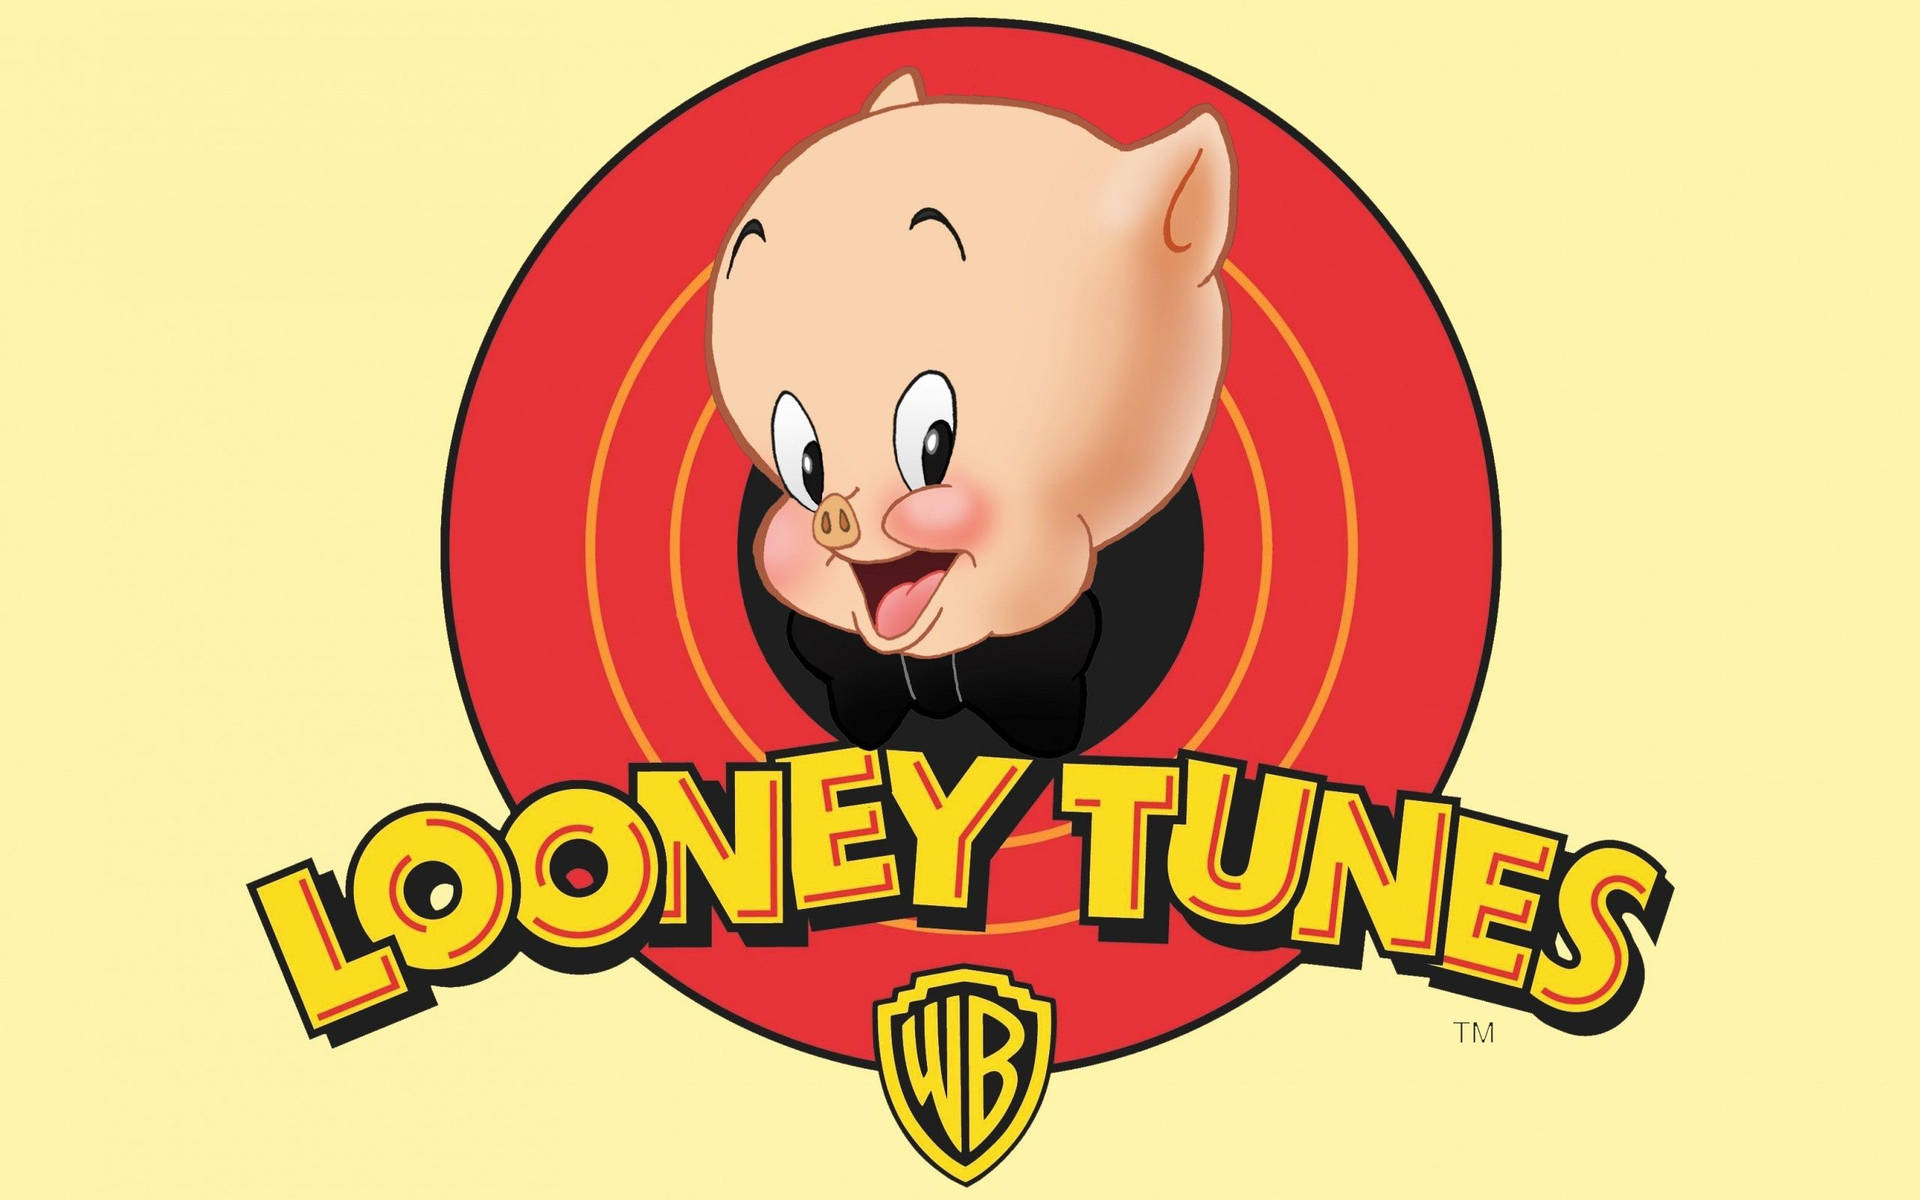 Porky Pig Pictures